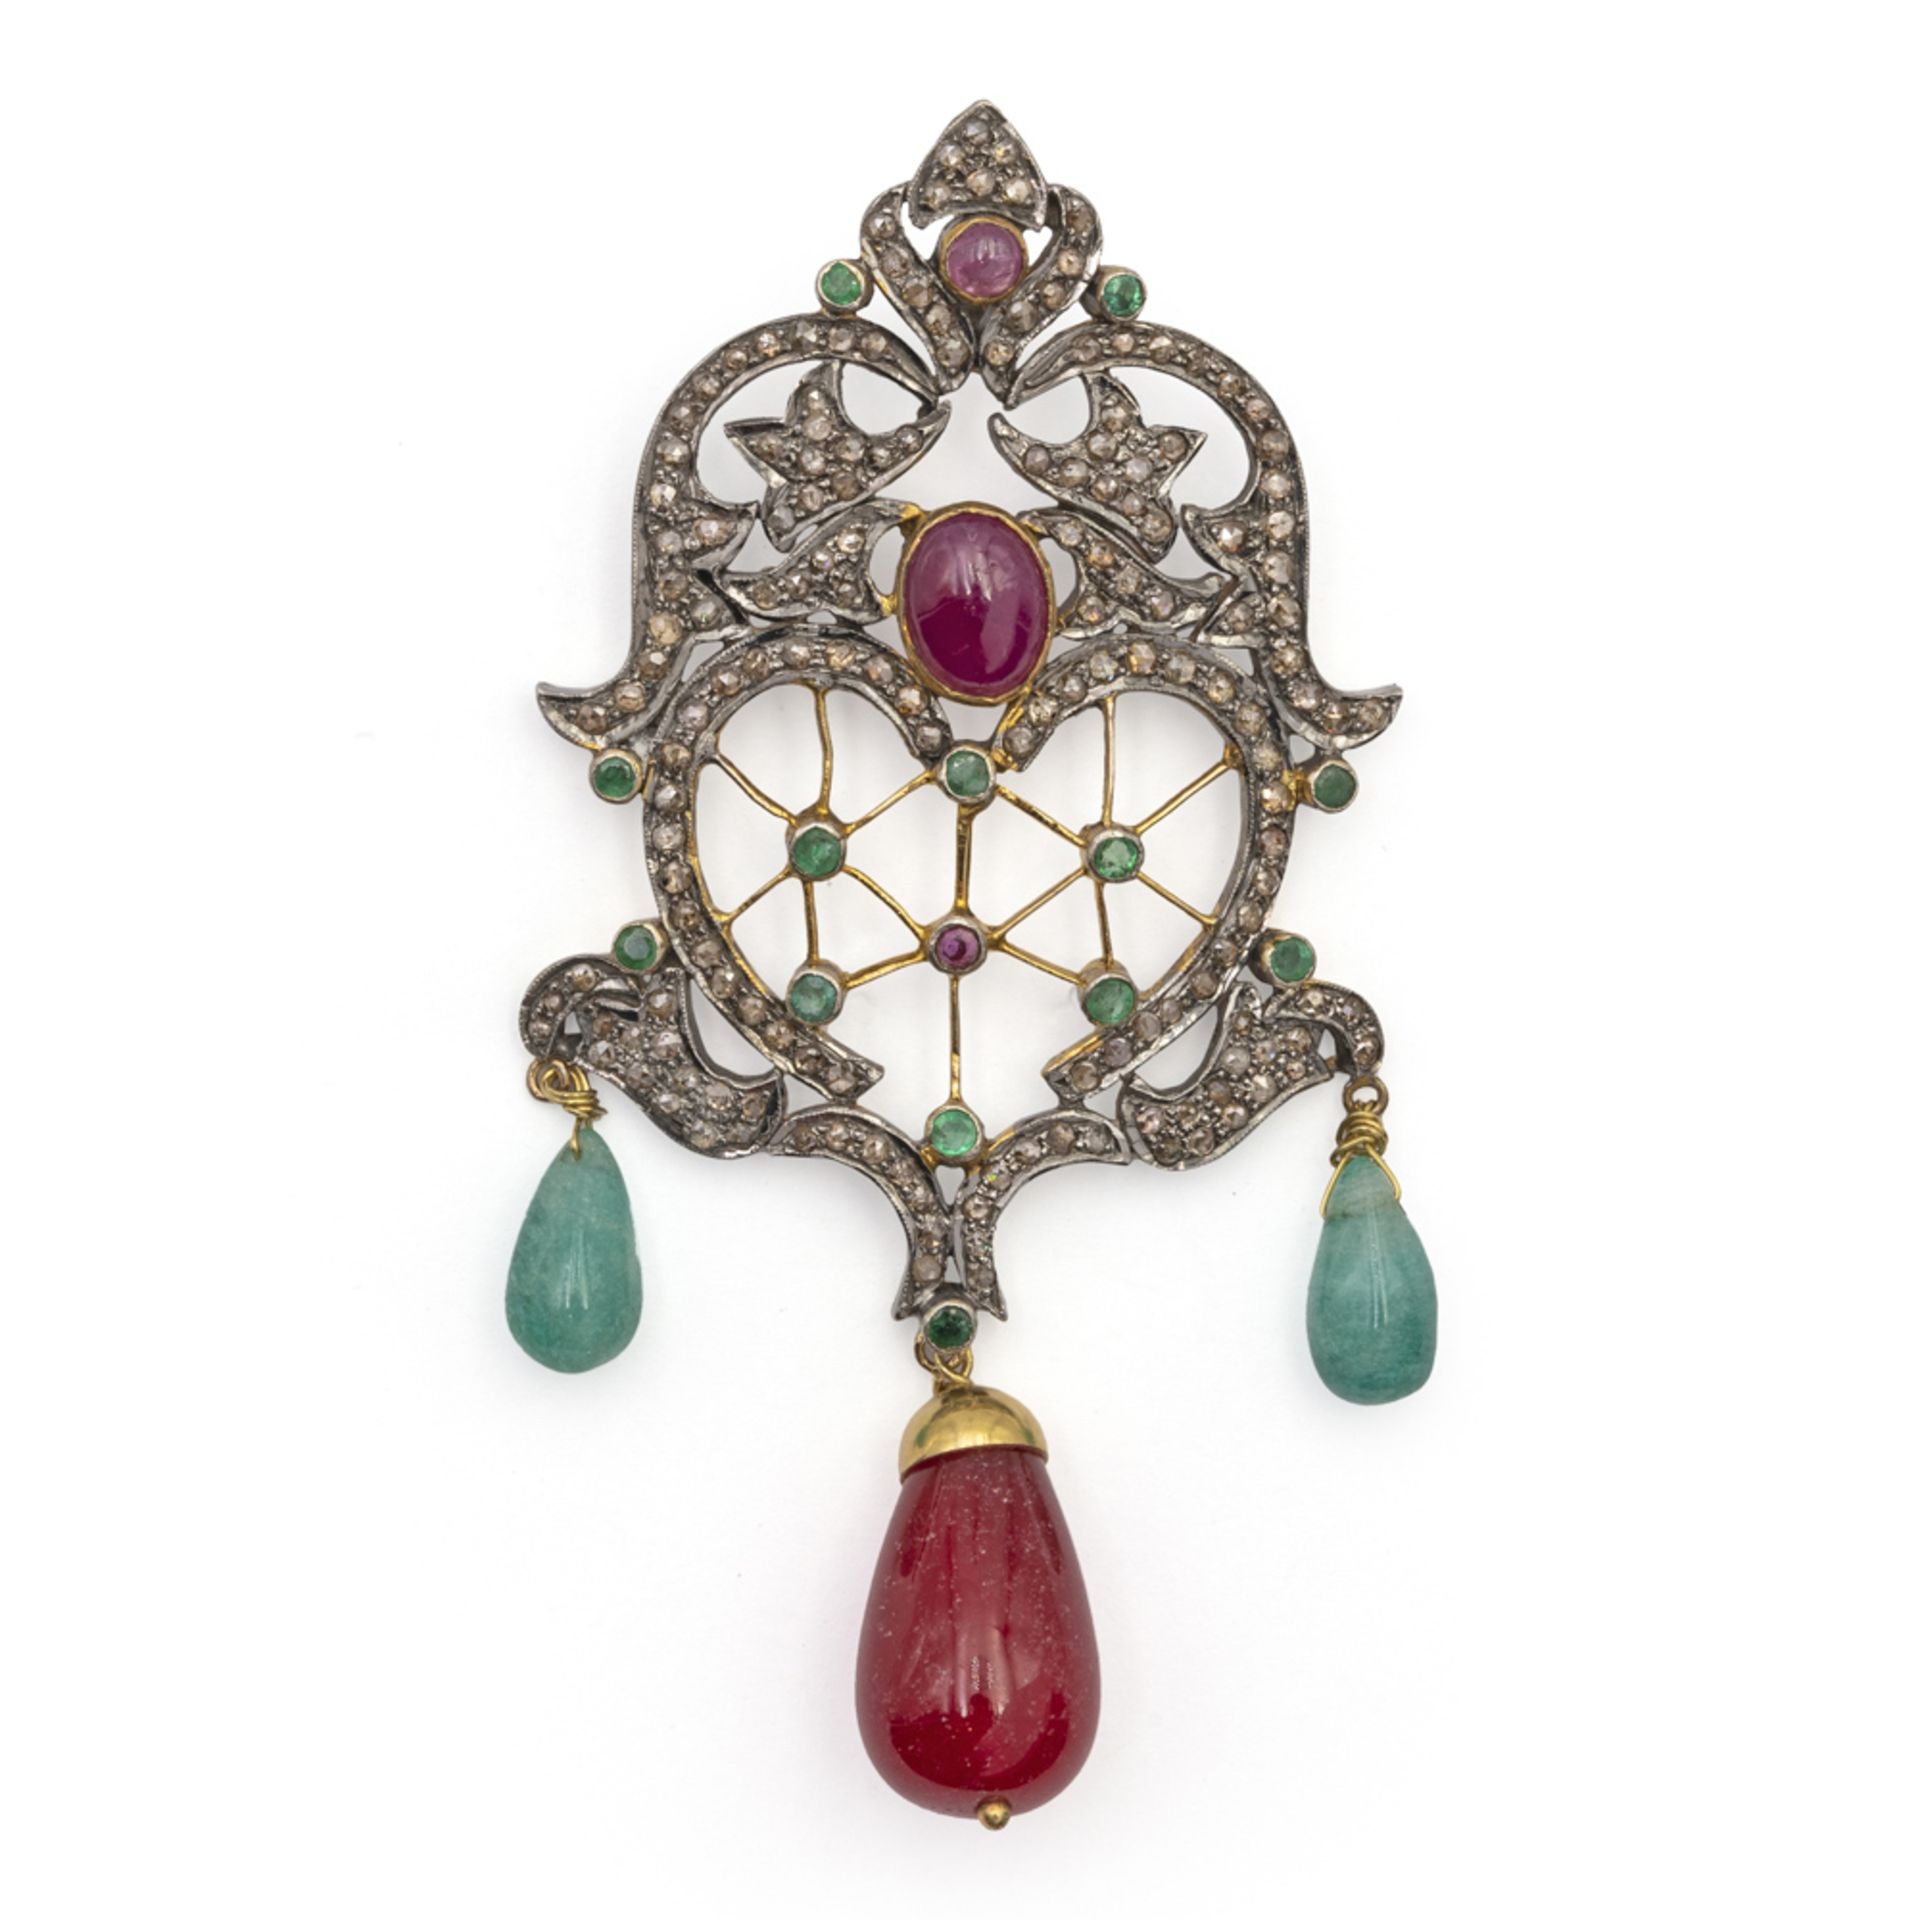 Gold and silver pendant with rubies and emeralds